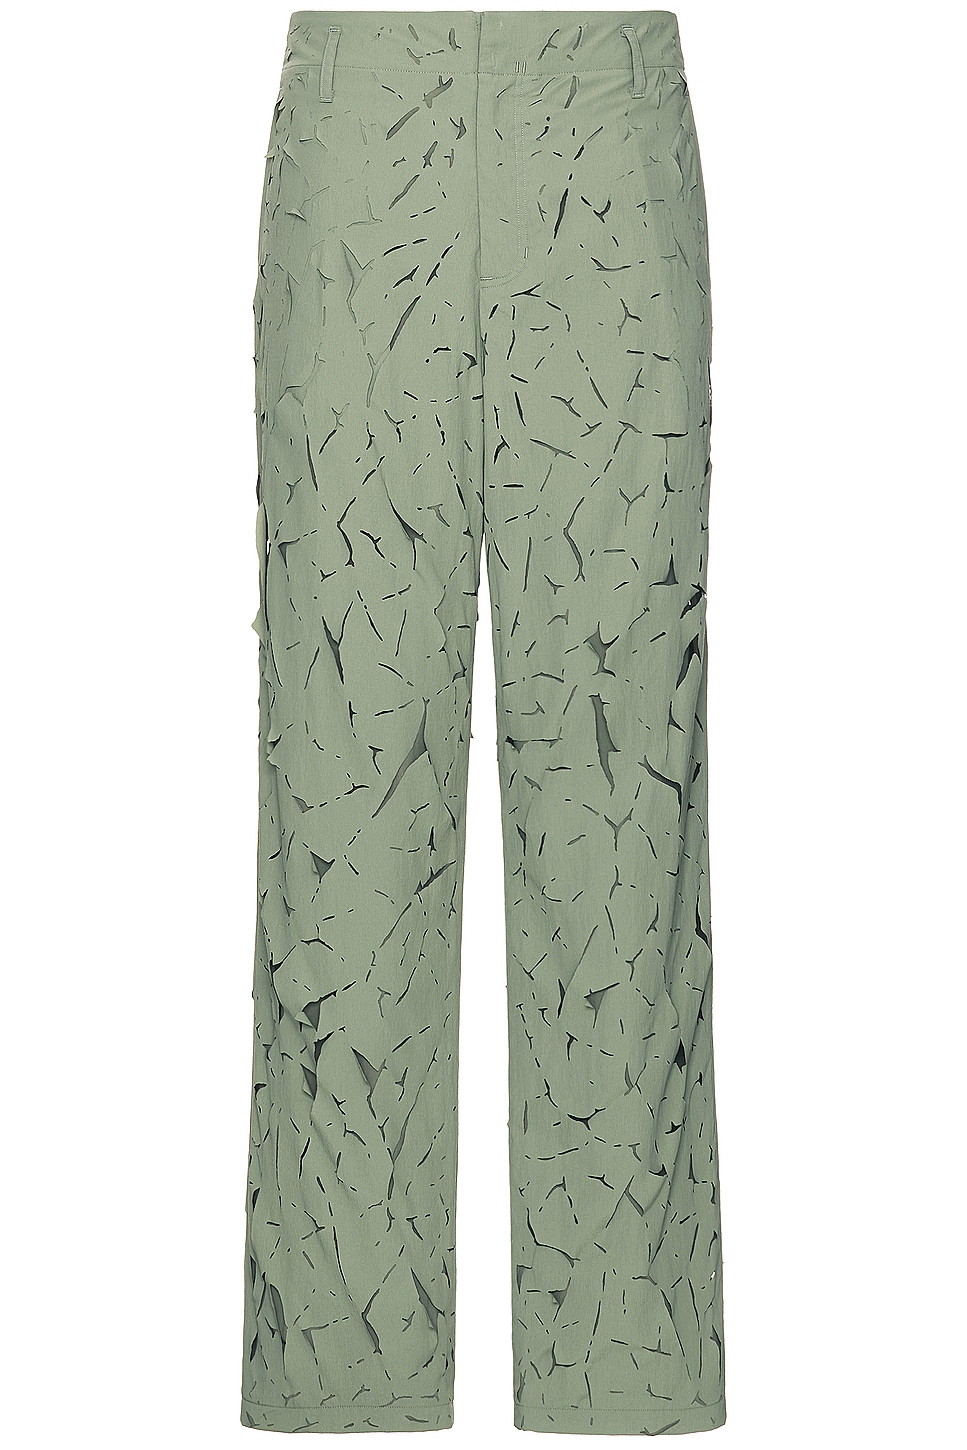 Image 1 of POST ARCHIVE FACTION (PAF) 6.0 Trousers in Olive Green